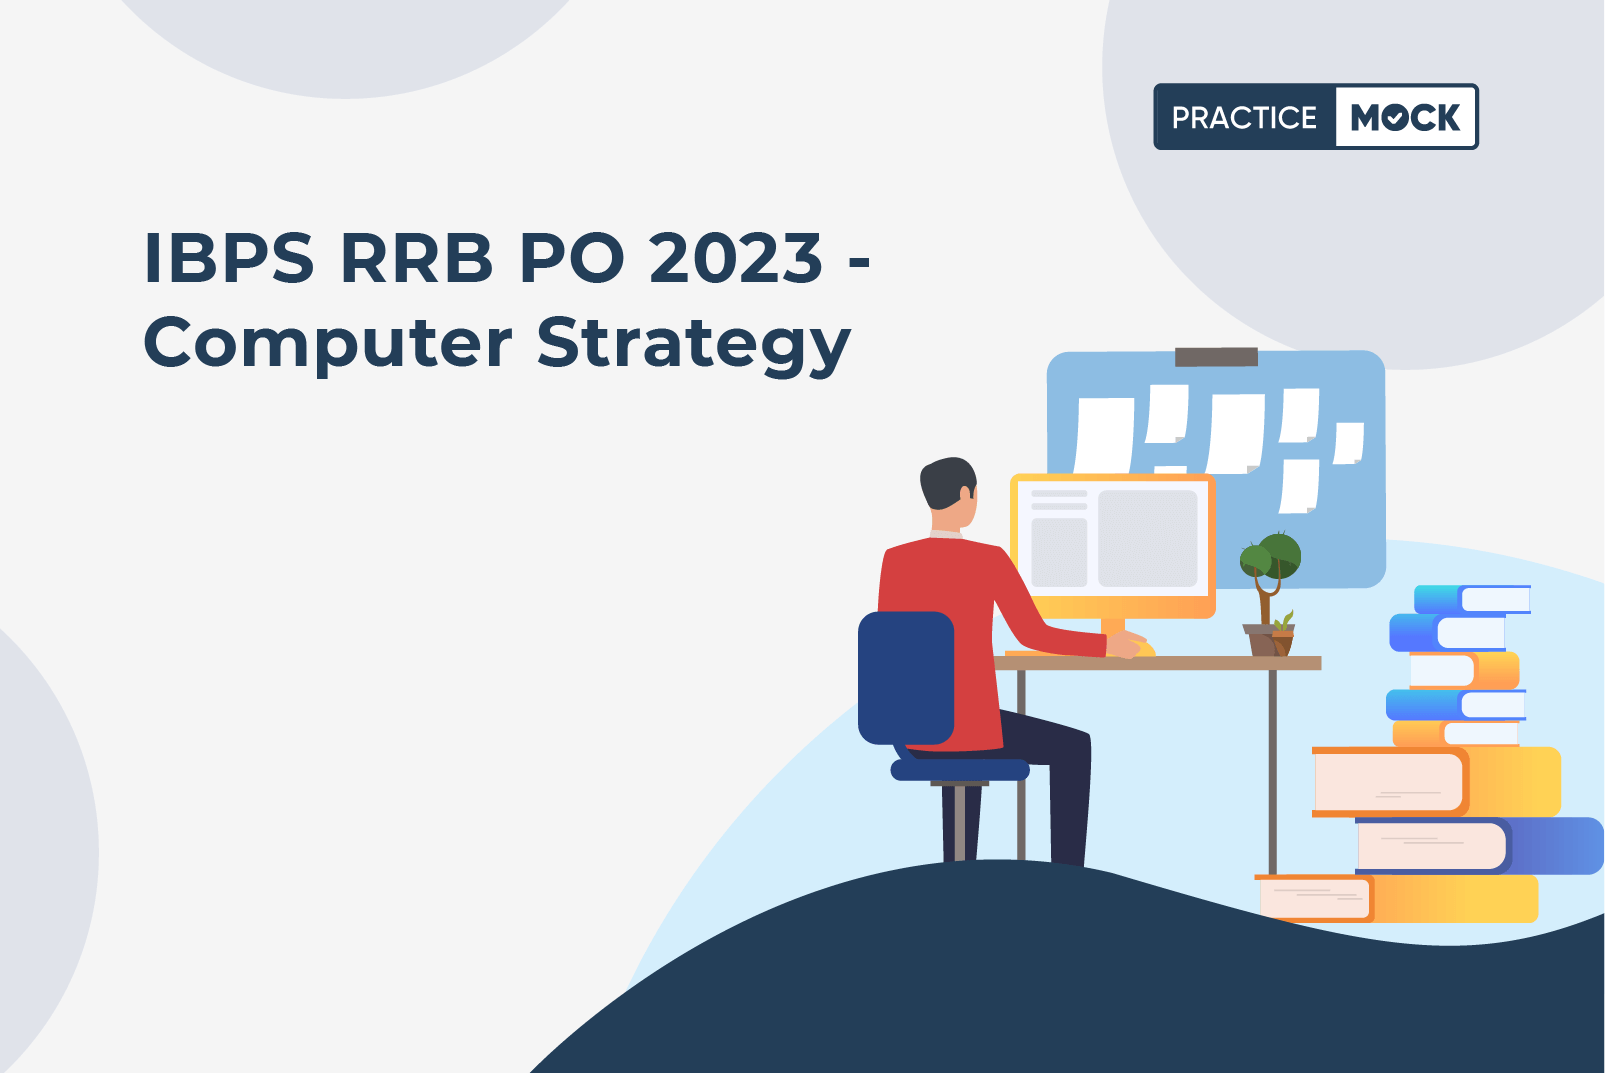 IBPS RRB PO 2023 - Computer Strategy